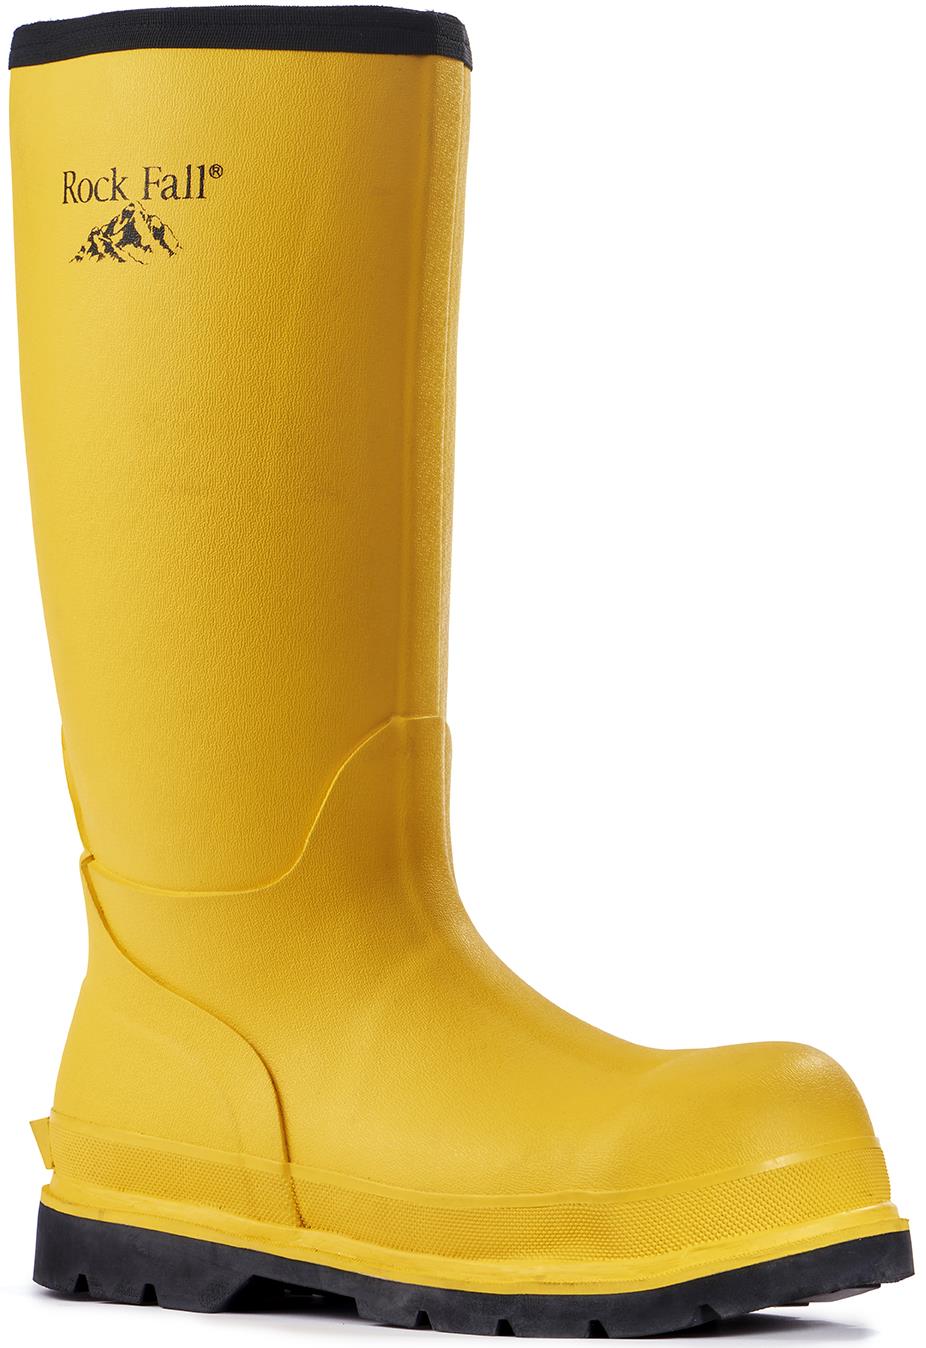 thermal safety wellingtons